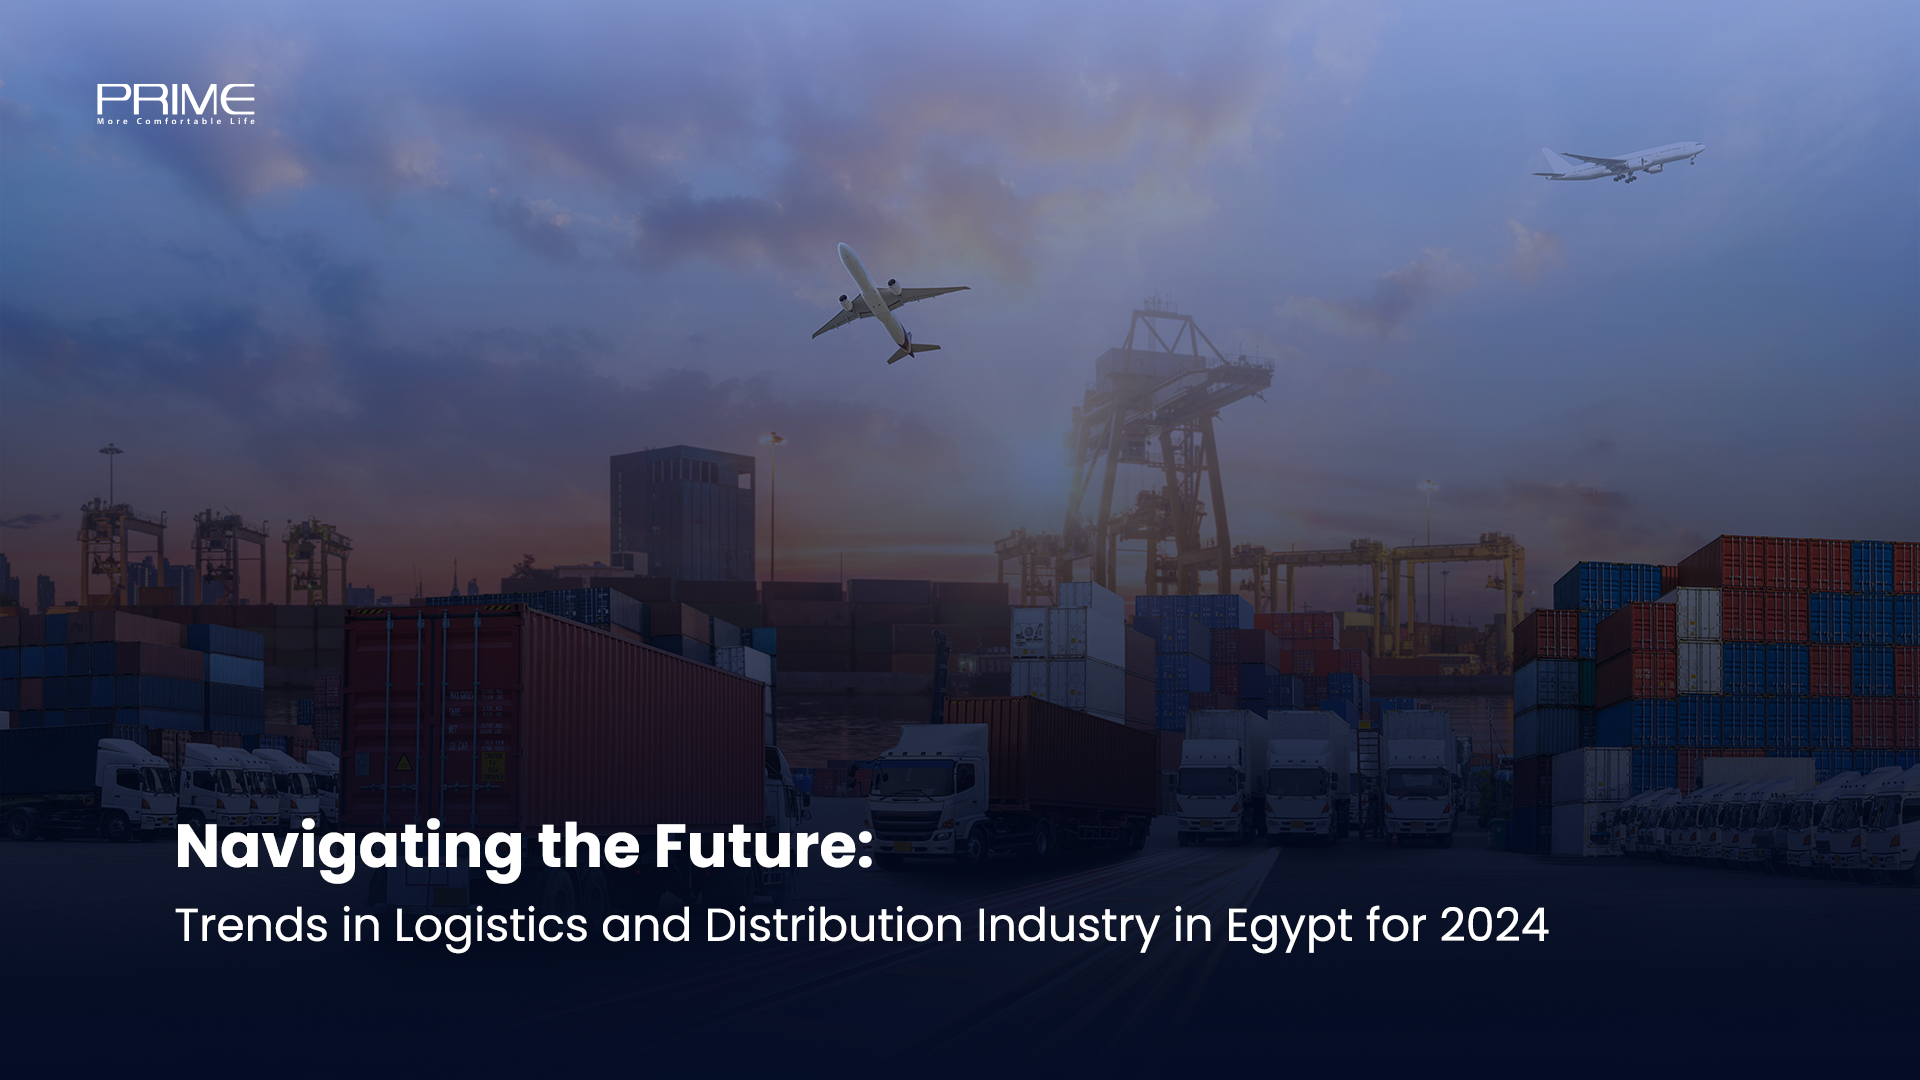 Navigating the Future: Trends in Logistics and Distribution Industry in Egypt for 2024